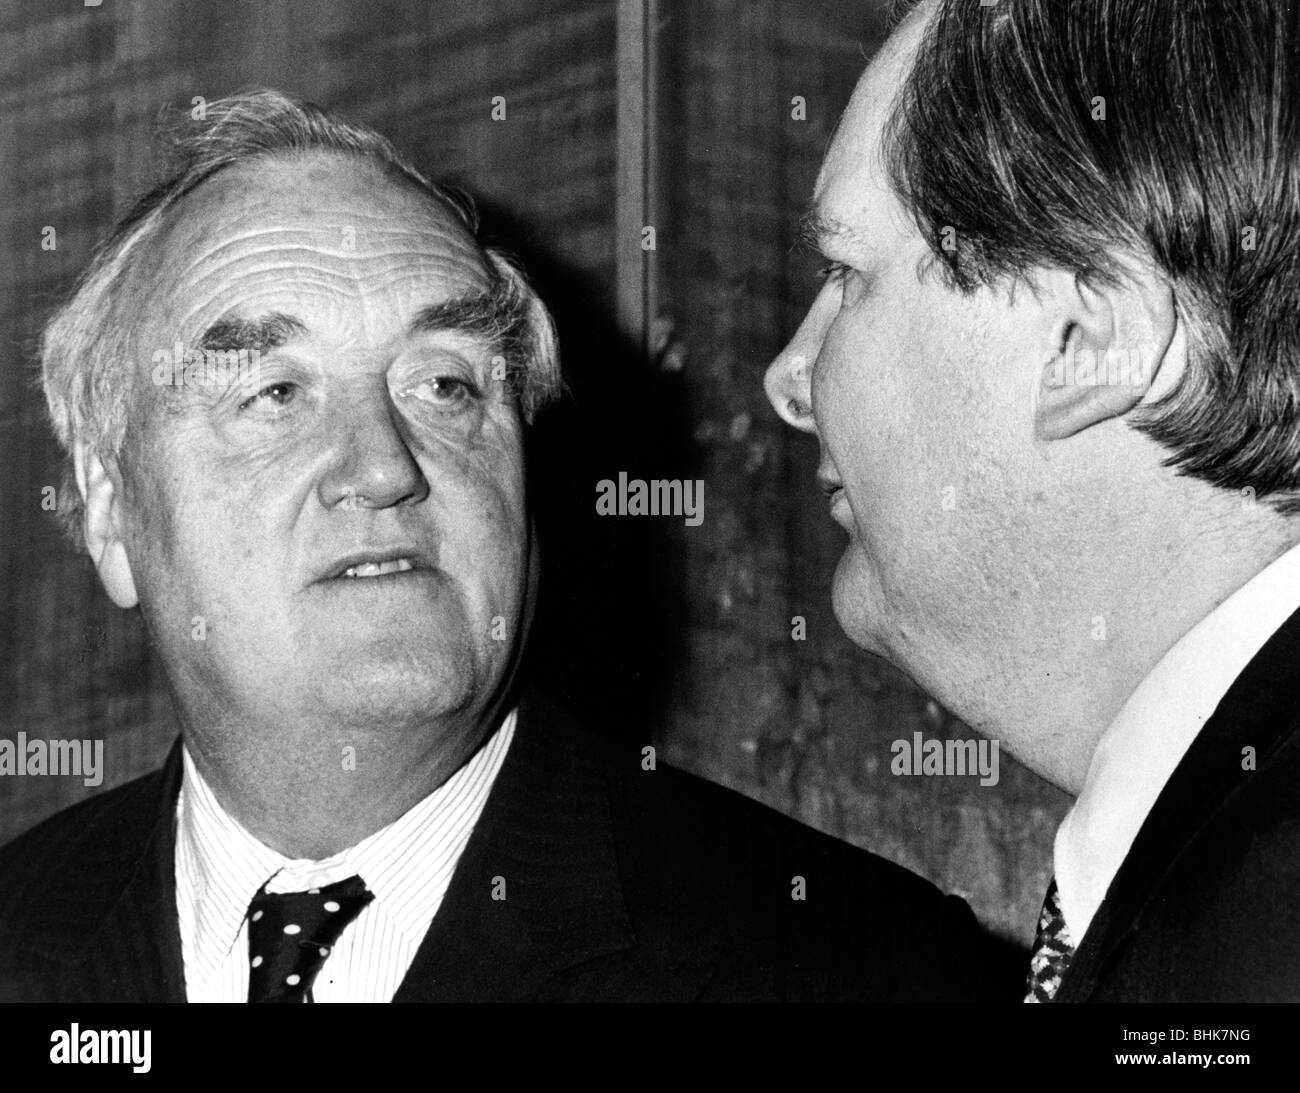 Lord William Whitelaw (1918-1999) with Lord Bethell (1922-2001), British politicians, 1989. Artist: Unknown Stock Photo